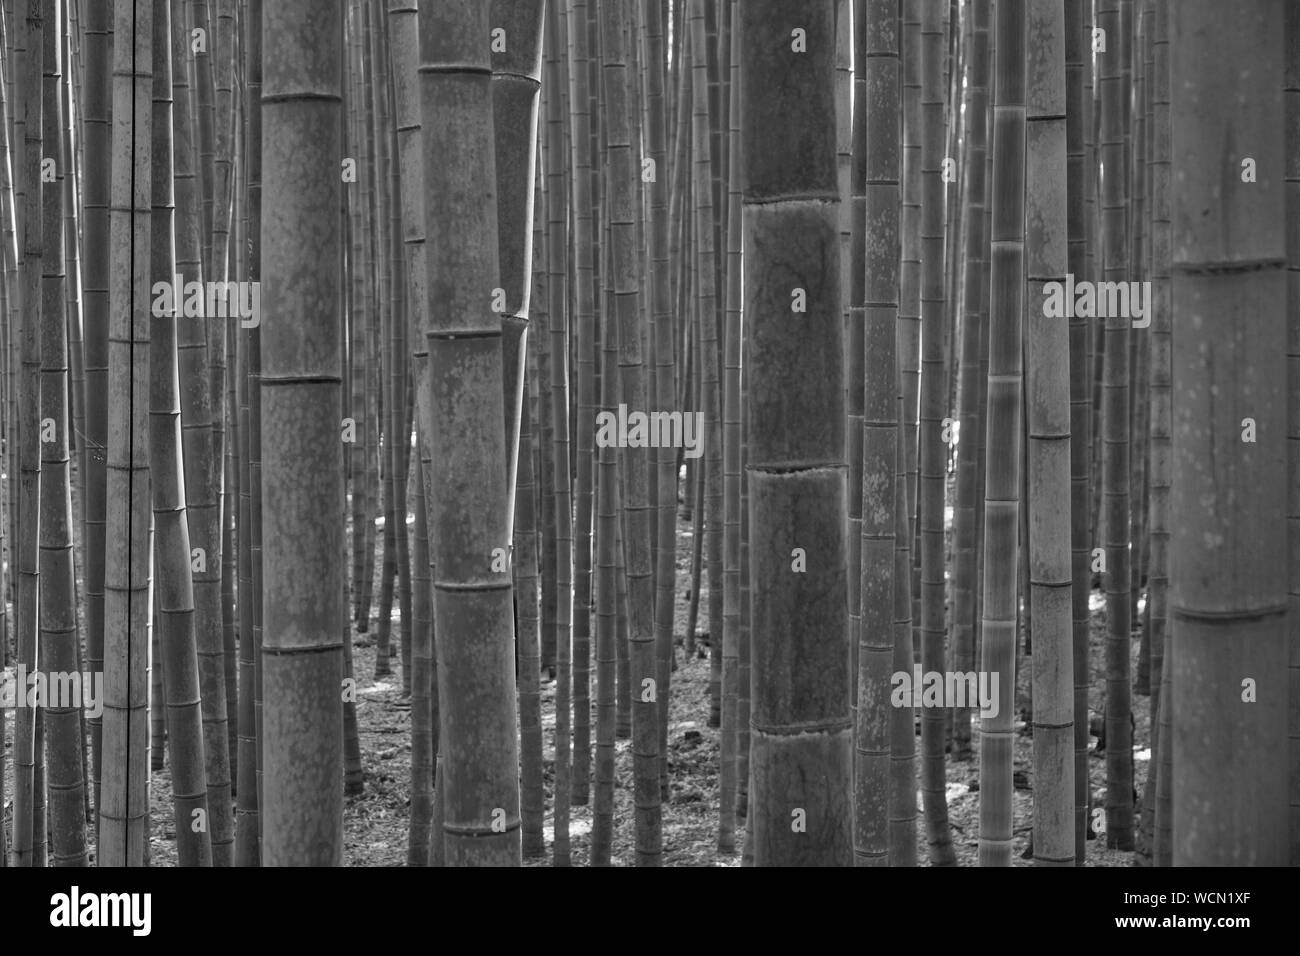 Blurred bamboo in bamboo forest in black and white style Stock Photo